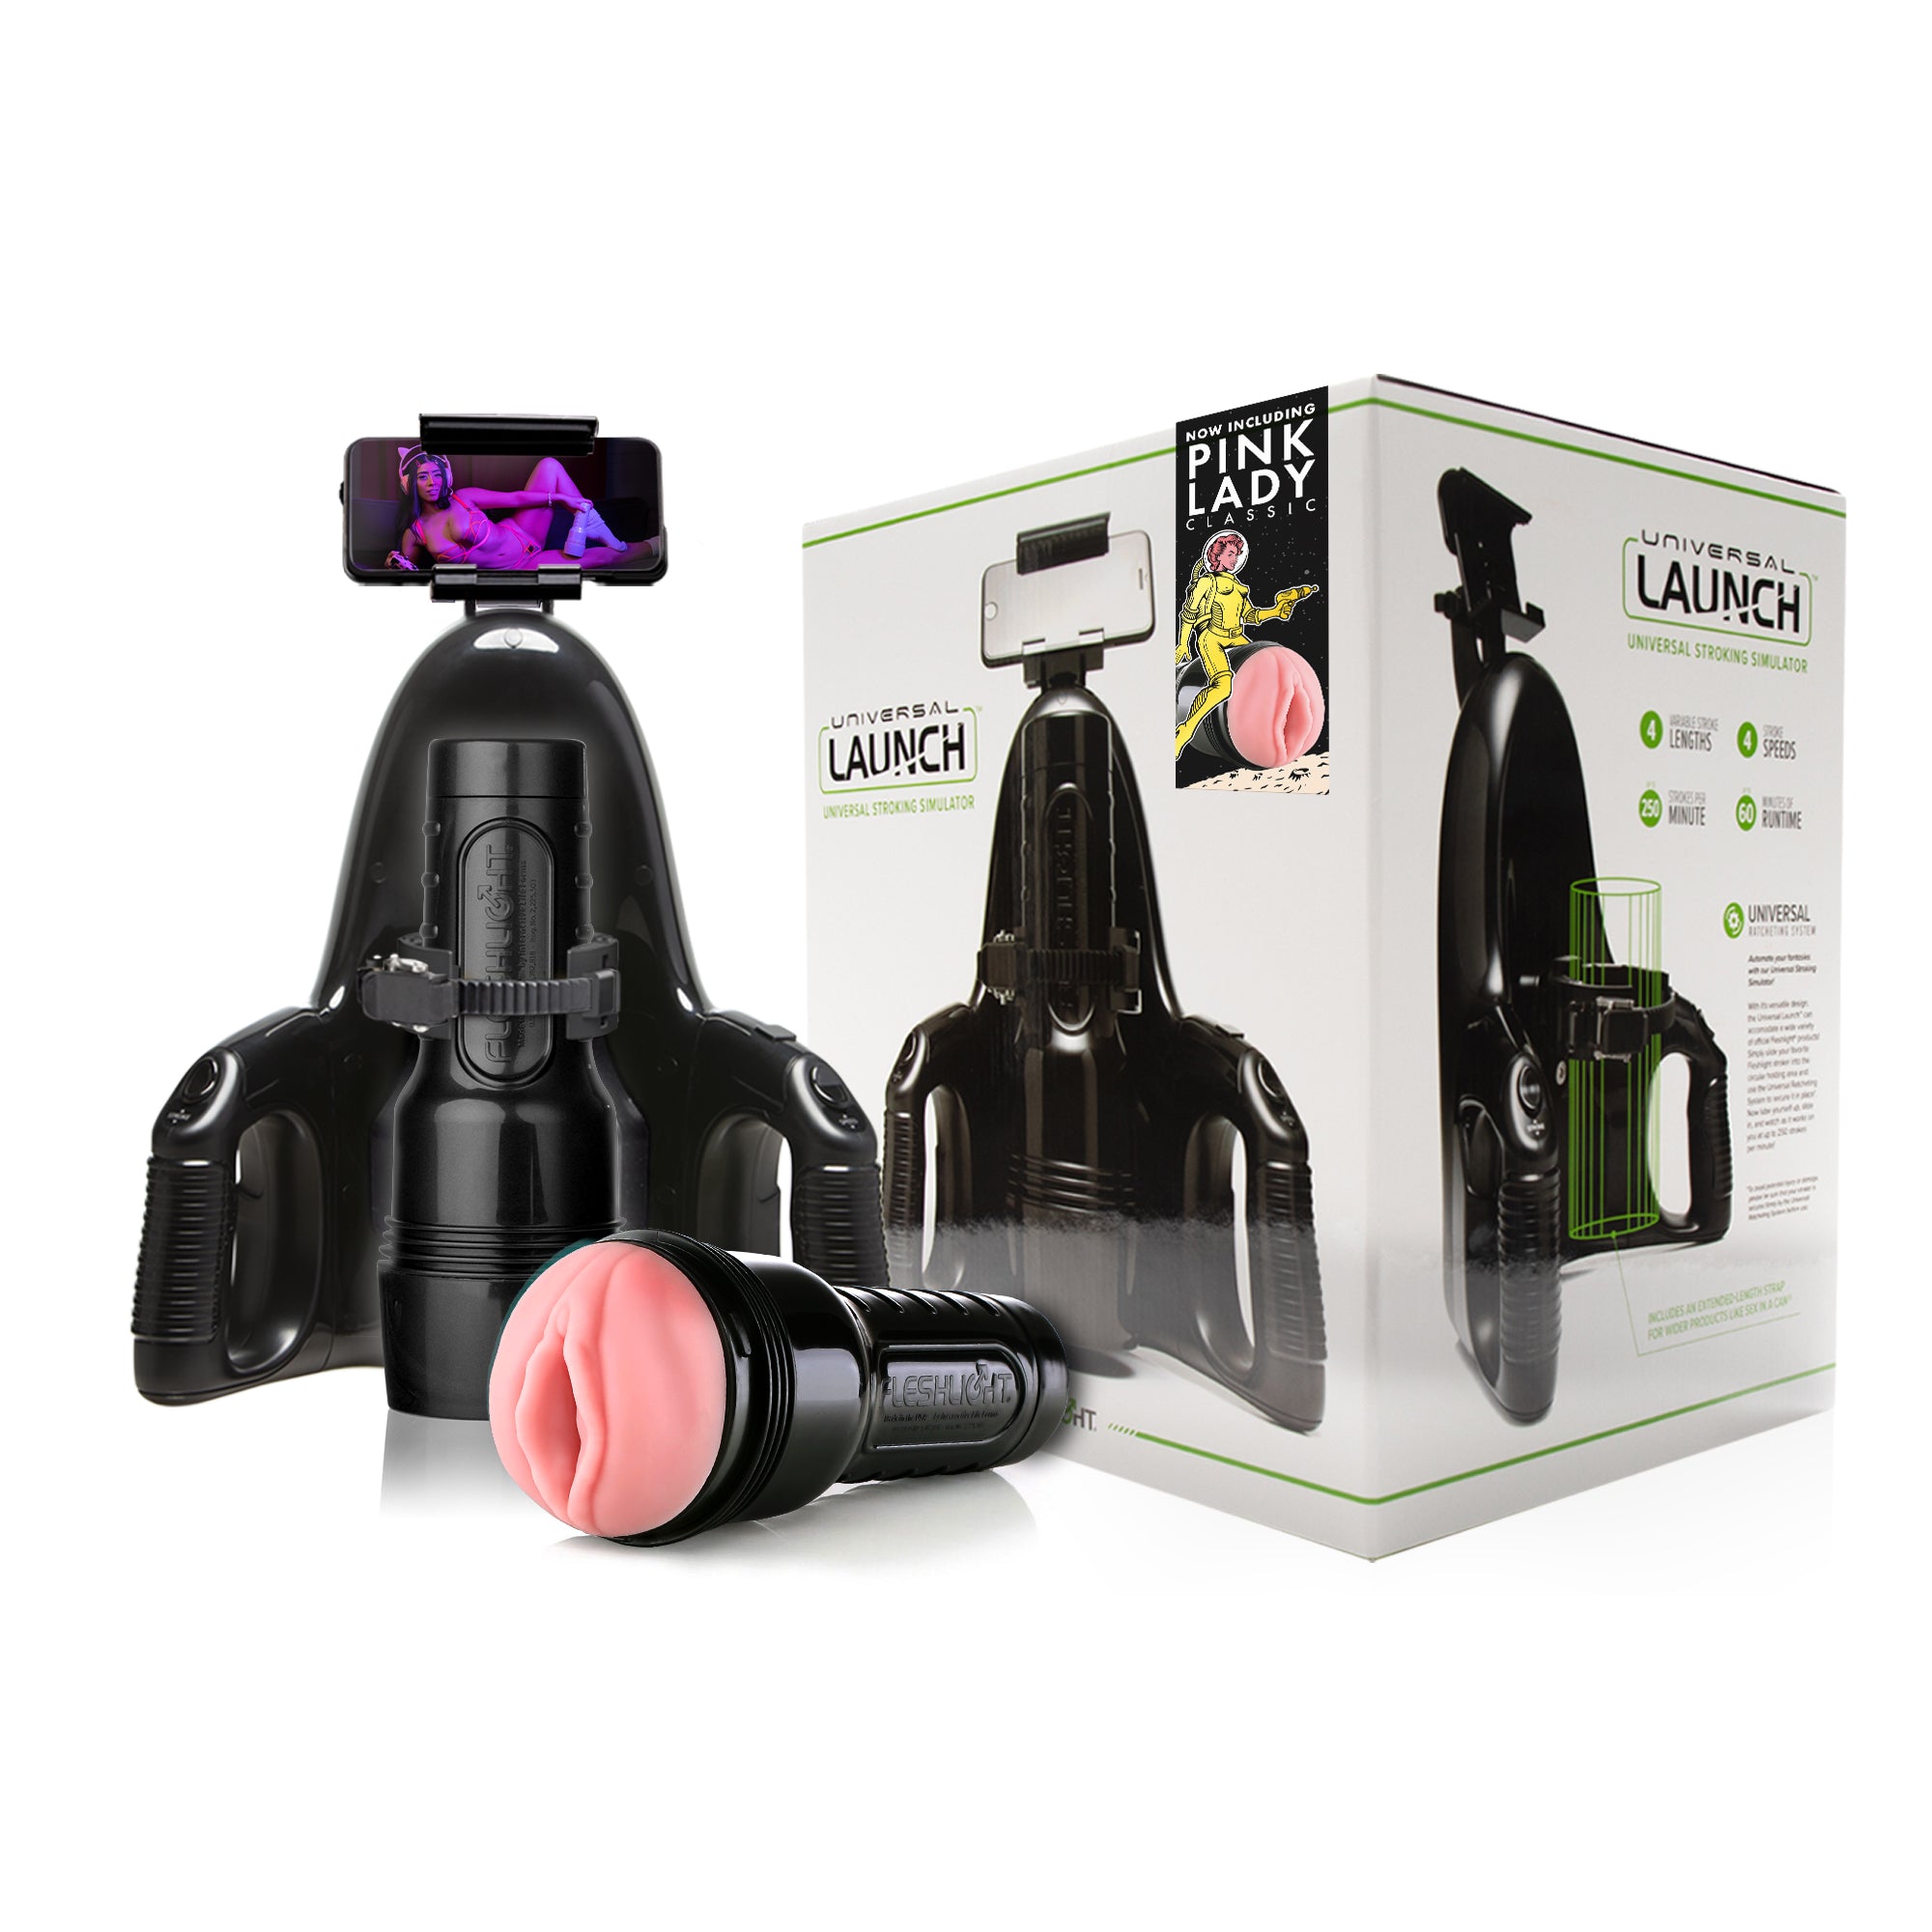 Vibrators, Sex Toy Kits and Sex Toys at Cloud9Adults - Fleshlight Universal Launch - Buy Sex Toys Online